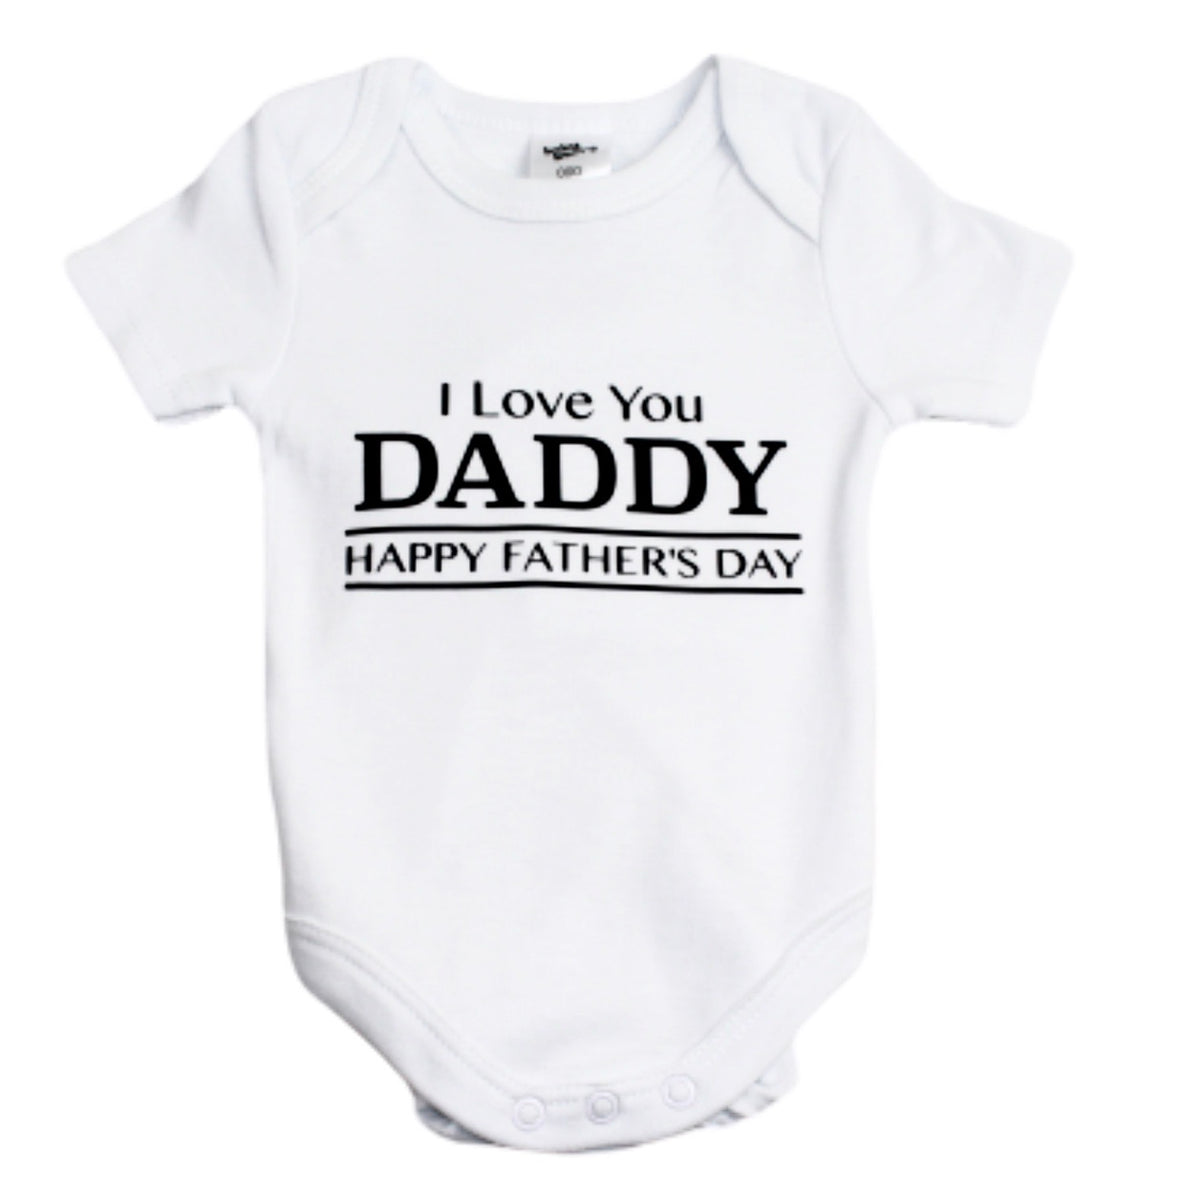 I love you Daddy - Lullaby Lane Design